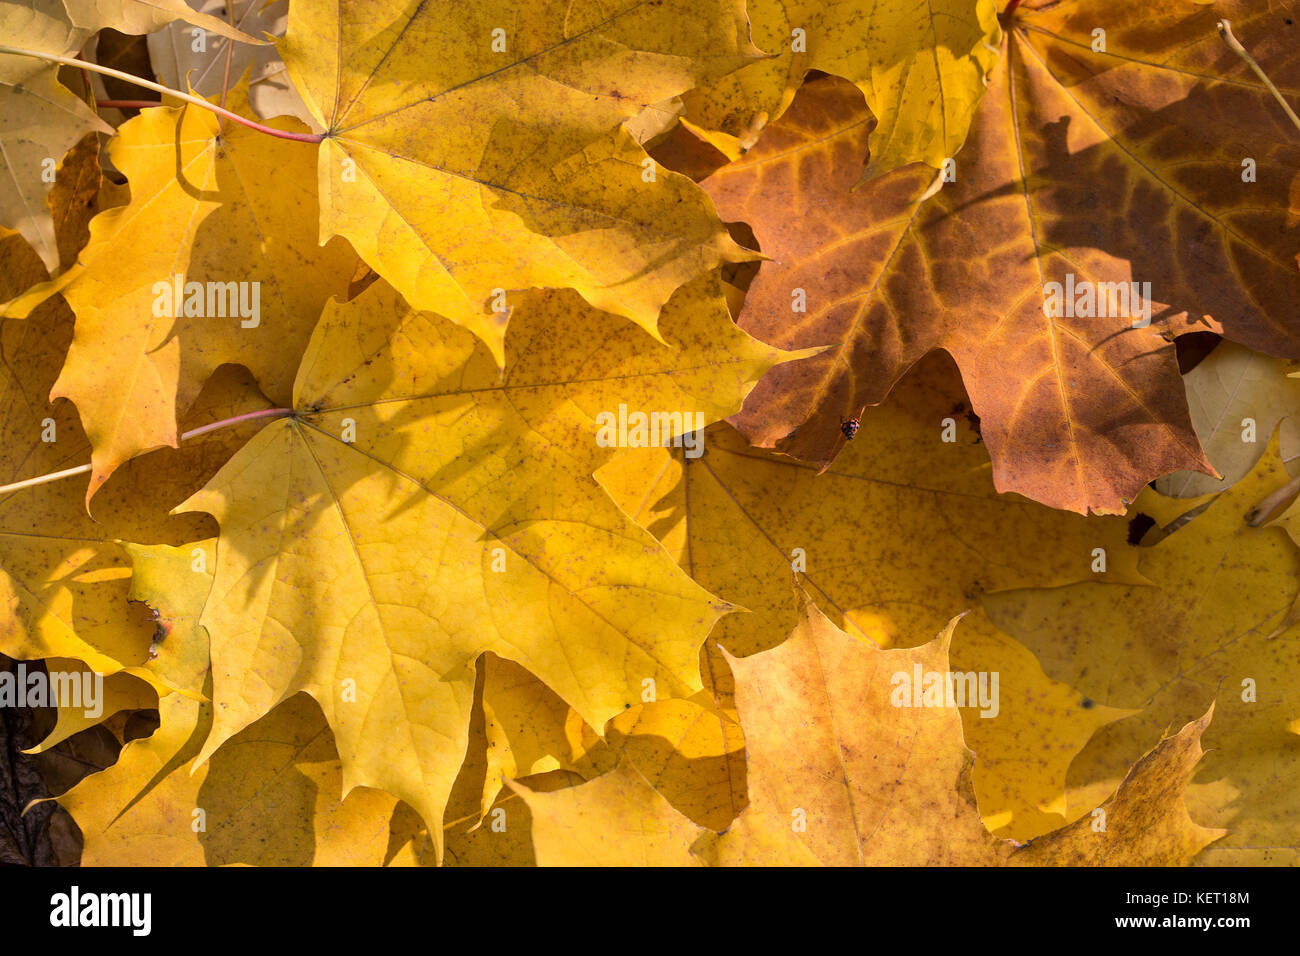 Pile of maple leaves in fall colors Stock Photo